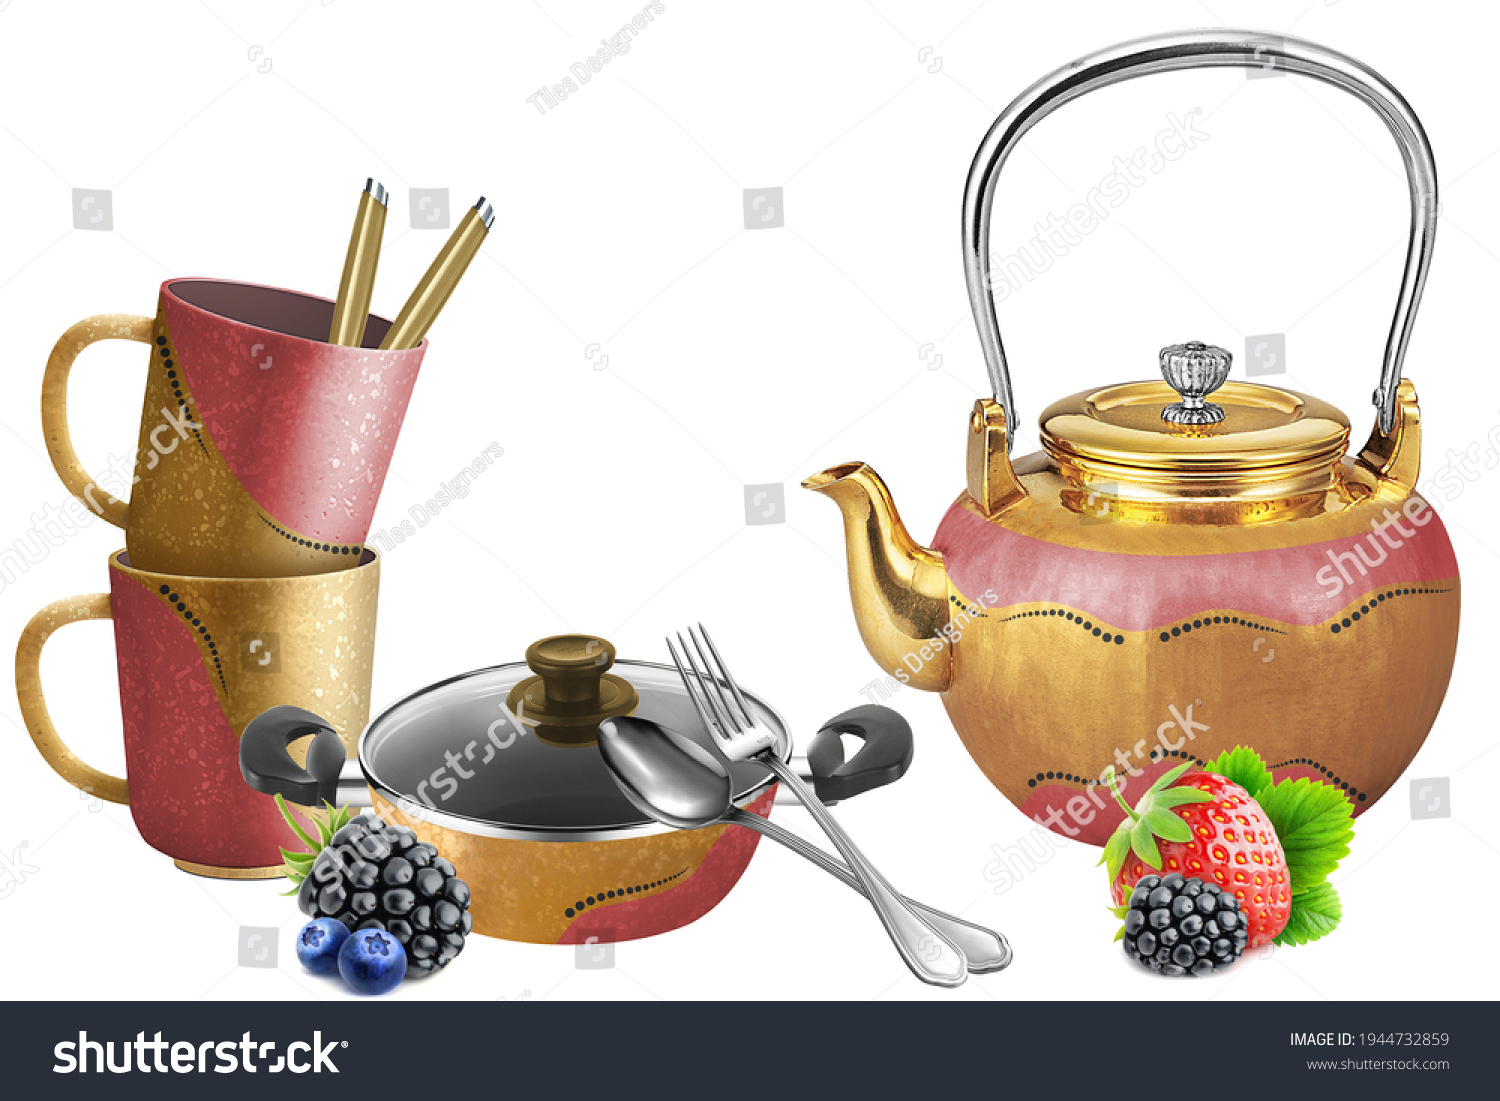 Gold and pink kitchen set with fruits strwbery grapes and spoon kitchen set ceramic tile #1944732859